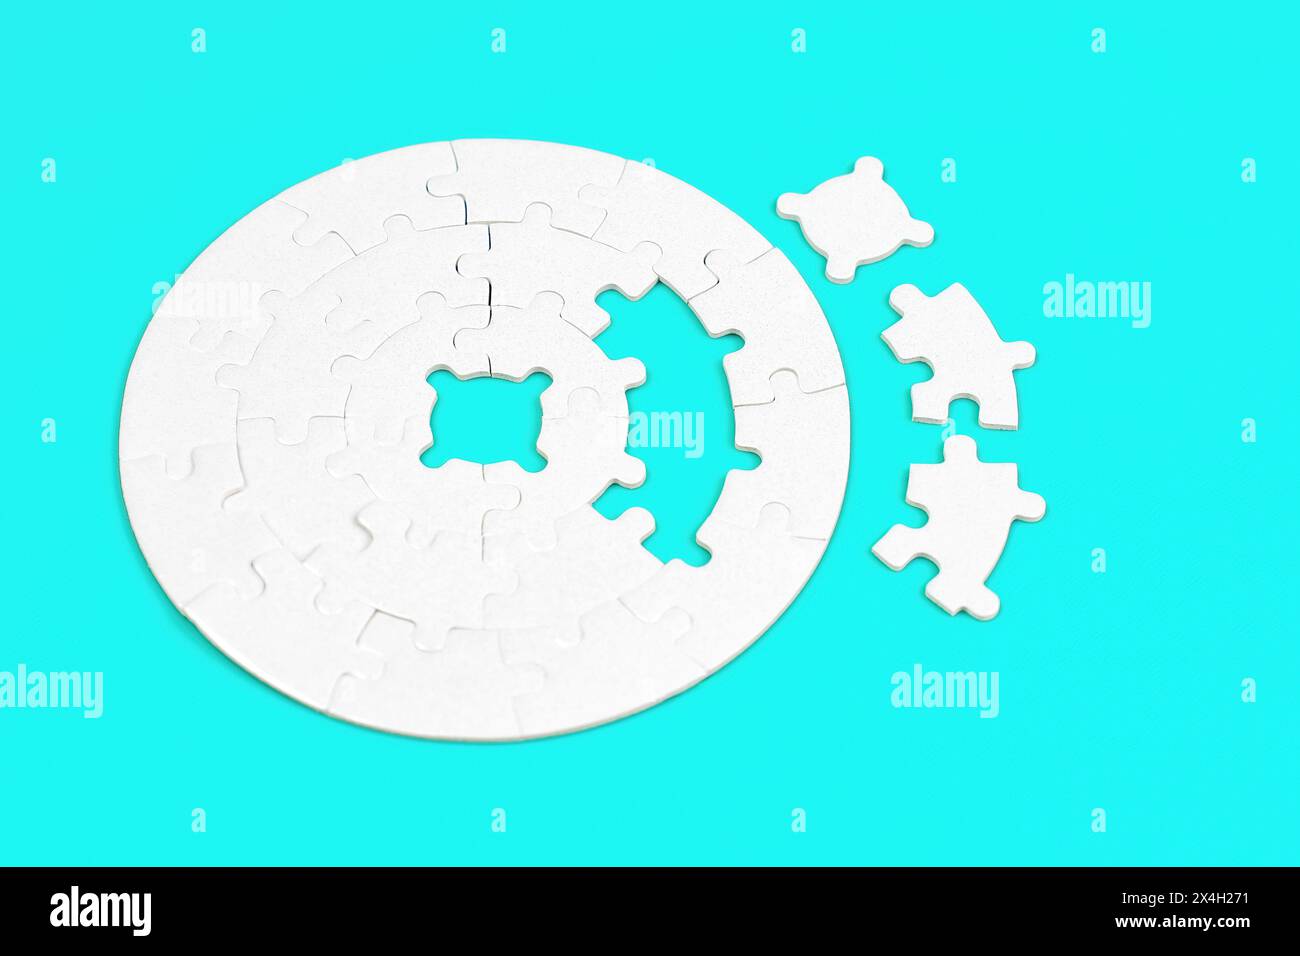 Blank round jigsaw puzzle and three final pieces set aside on a light blue background. Stock Photo